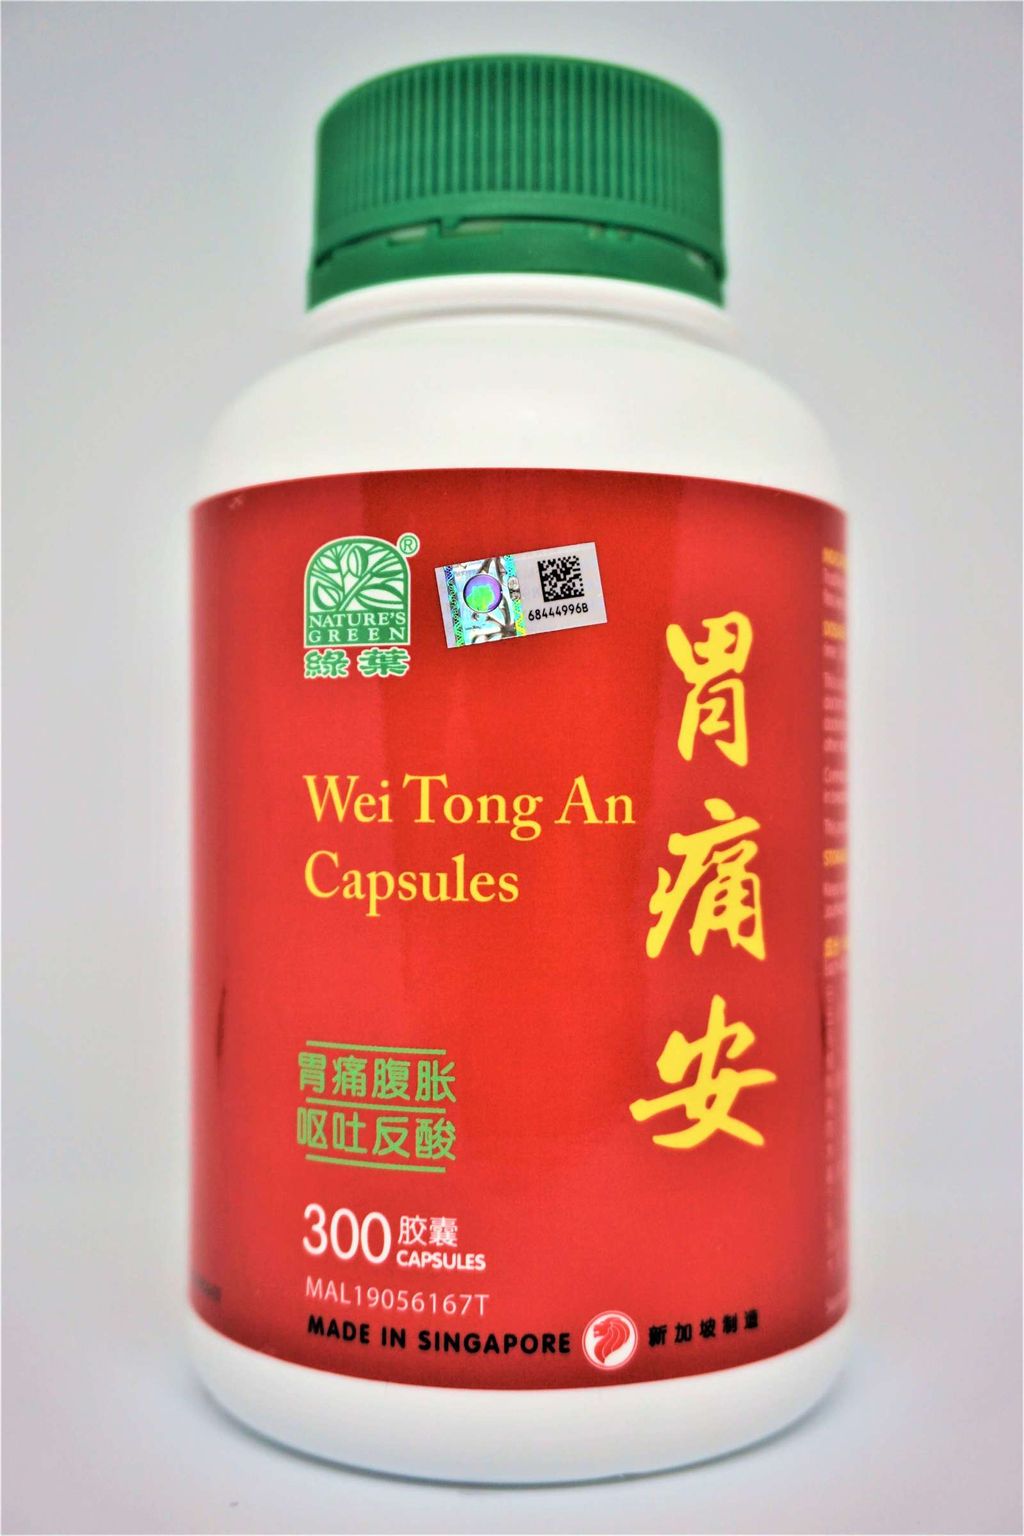 Traditional-Chinese-Medicine-Herbs-Product-1.JPG